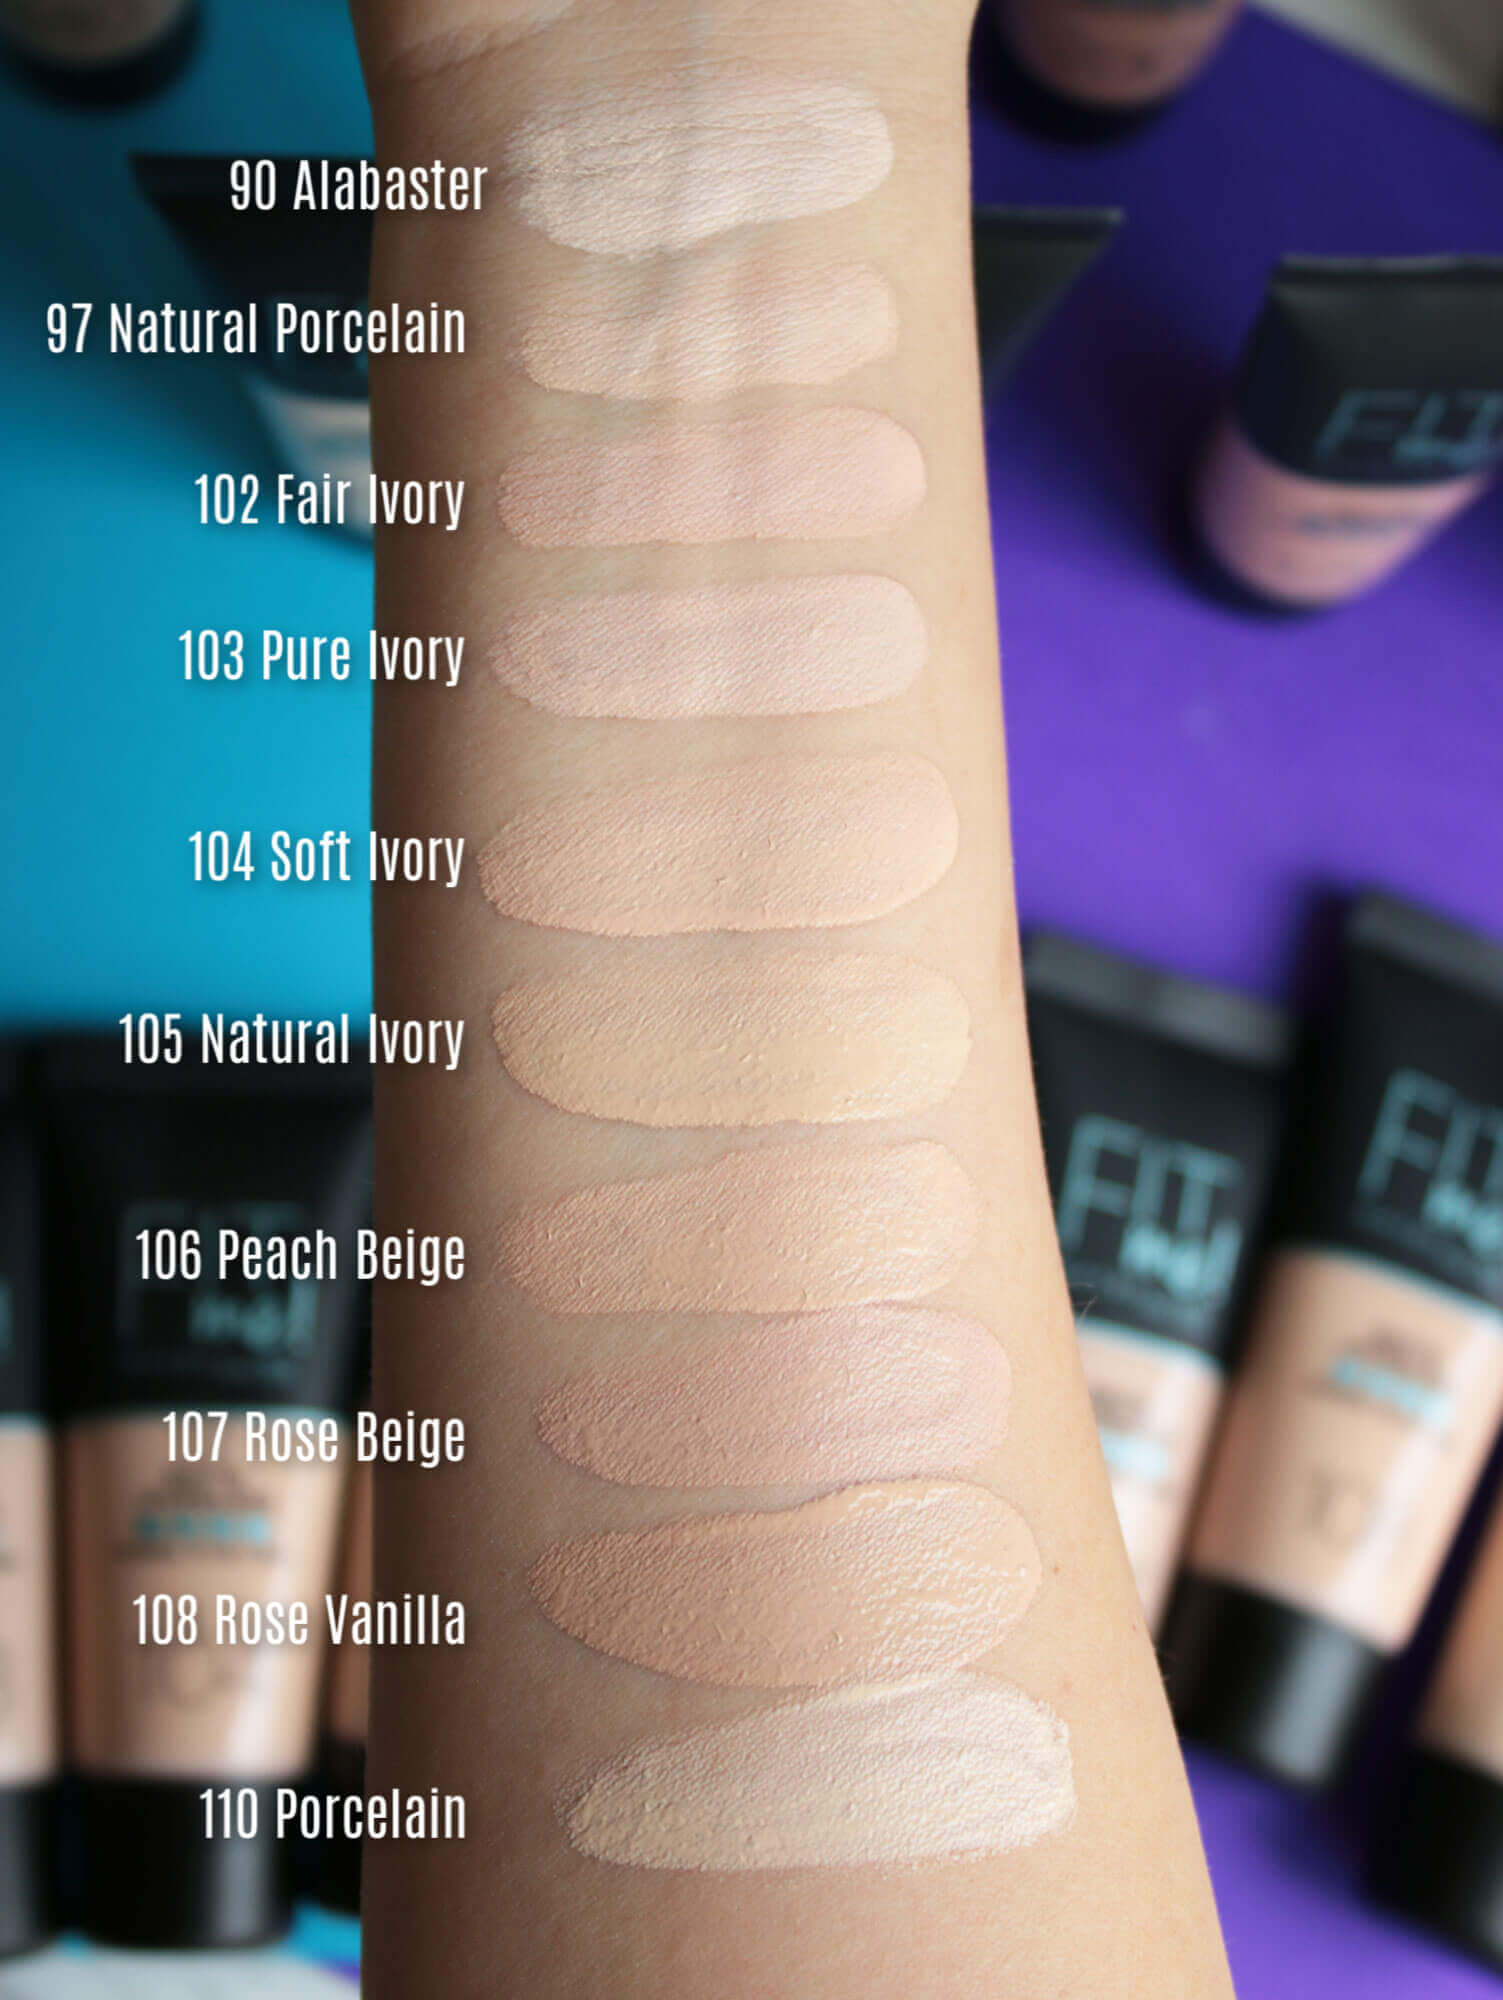 maybelline mate and poreless foundation mac shades